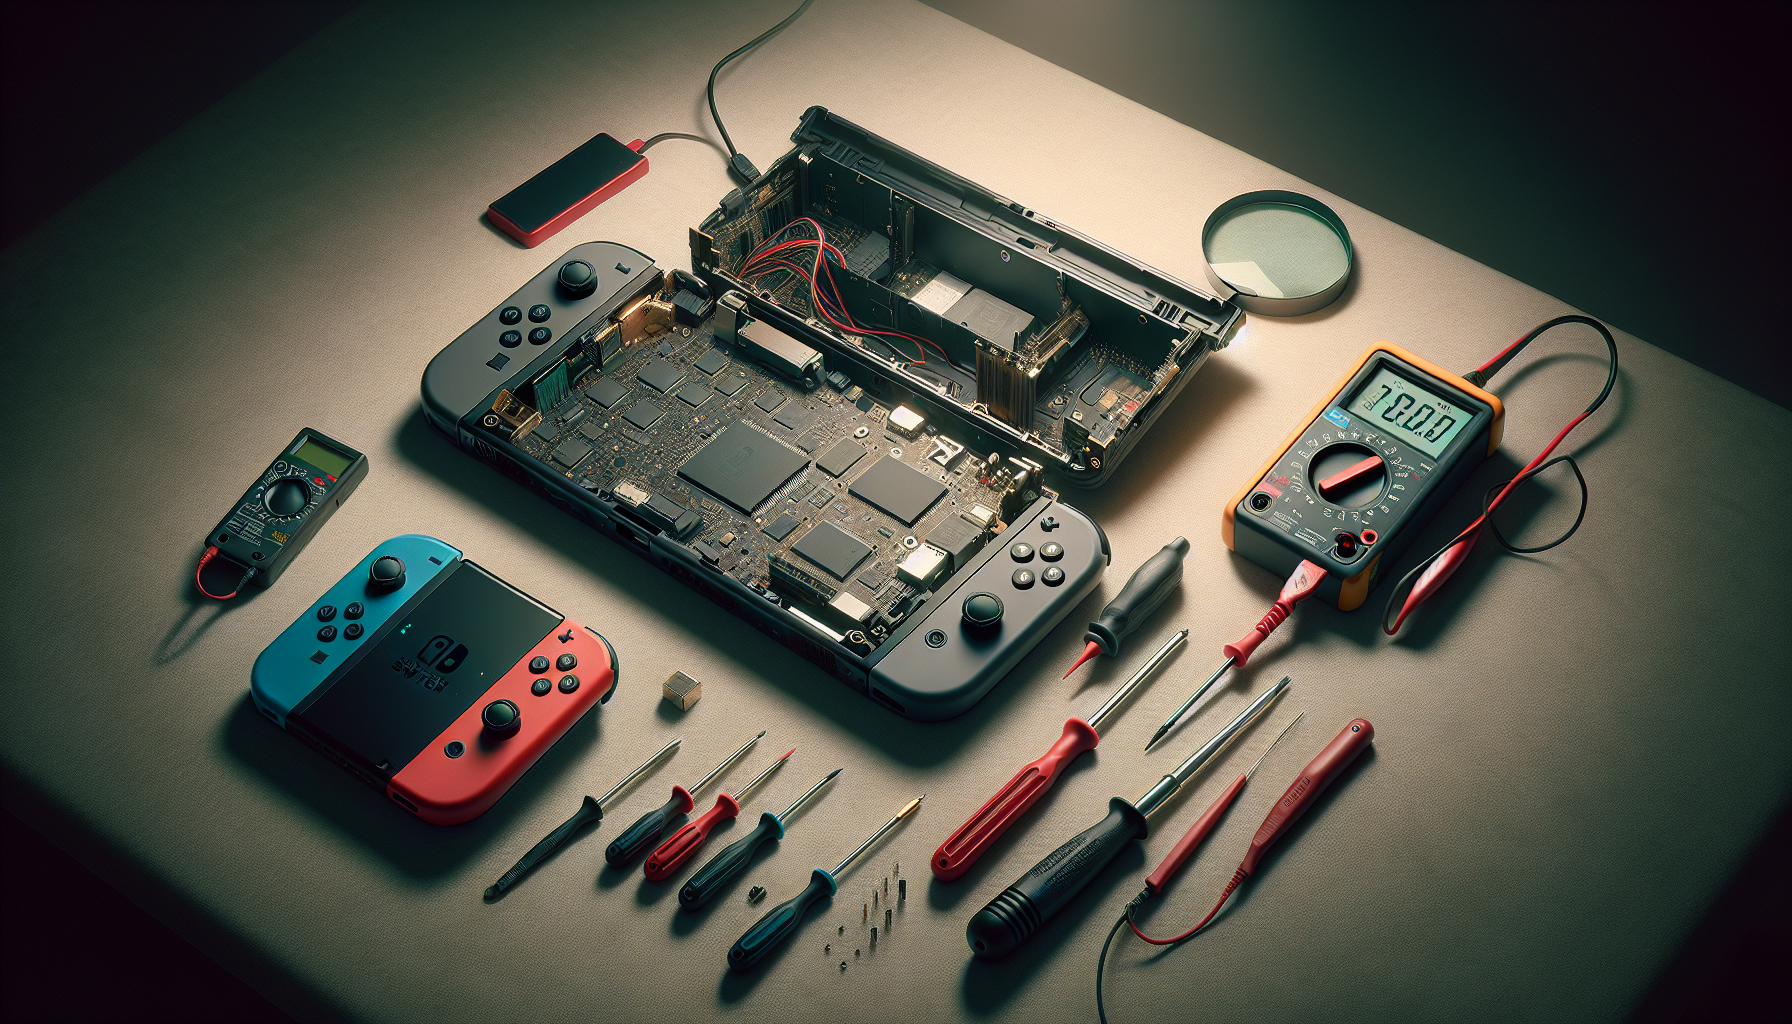 Nintendo Switch Not Powering On: Repairing the Charging Issue